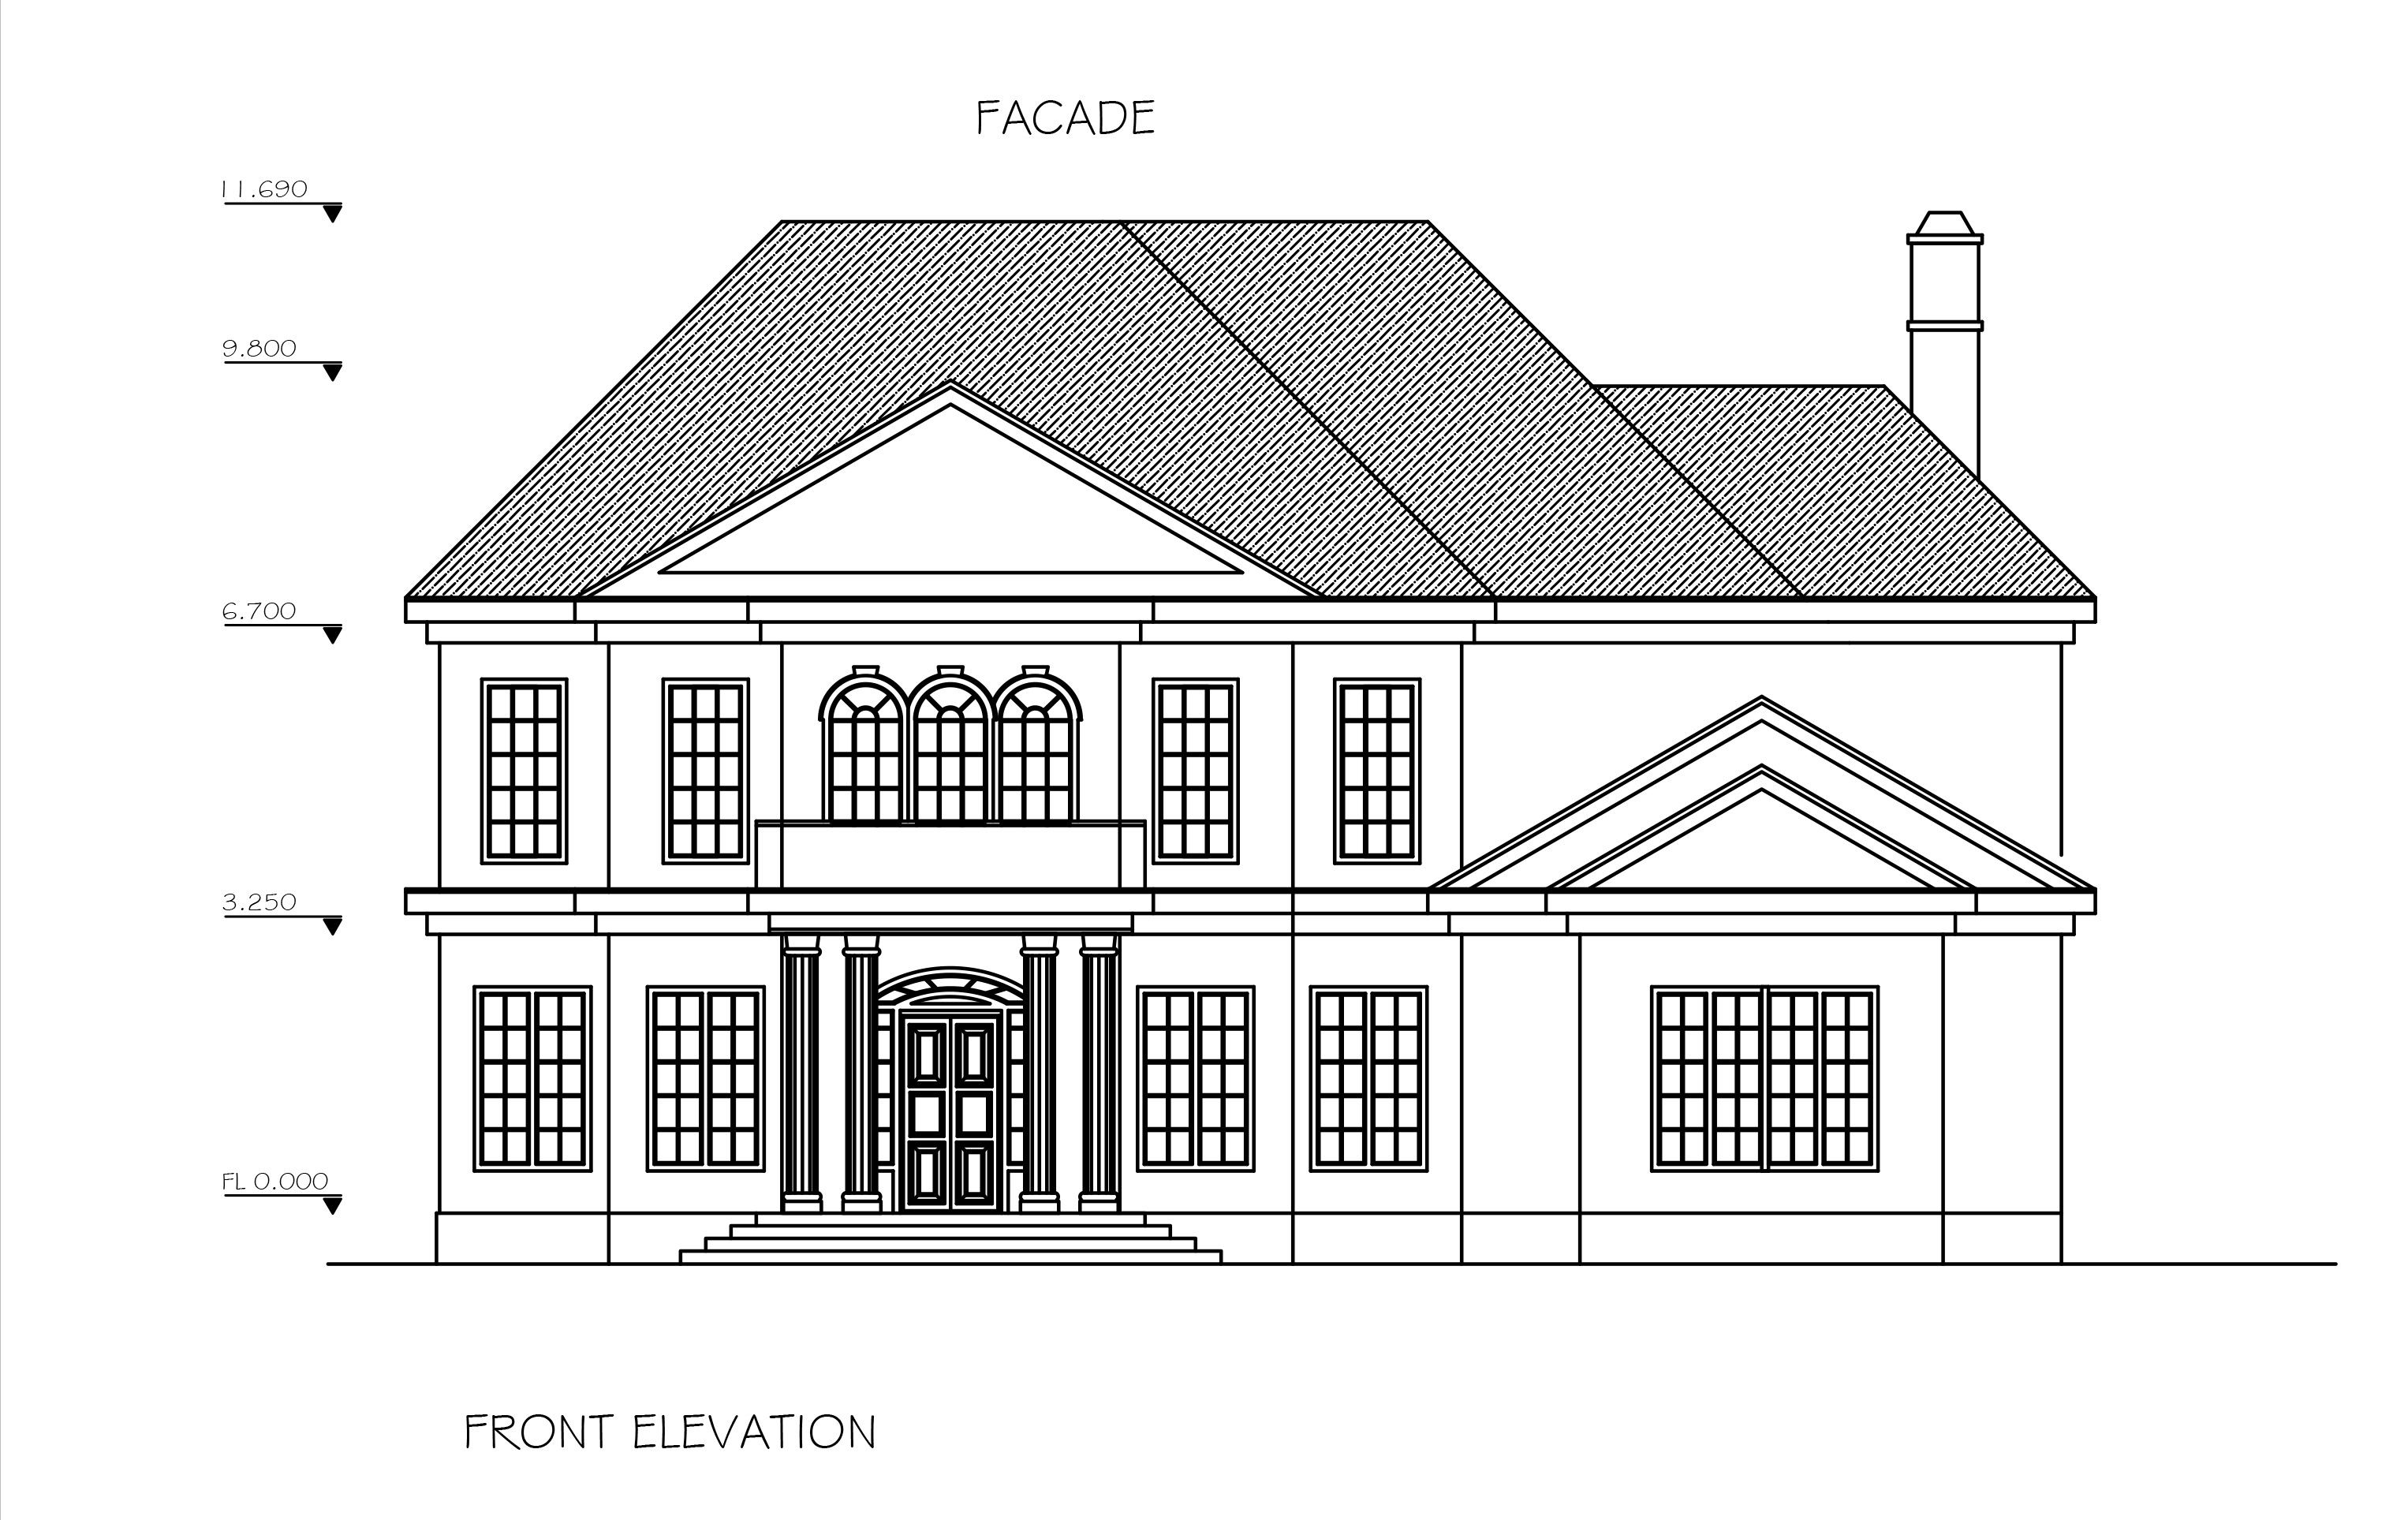 Front elevation double story house plan free download from